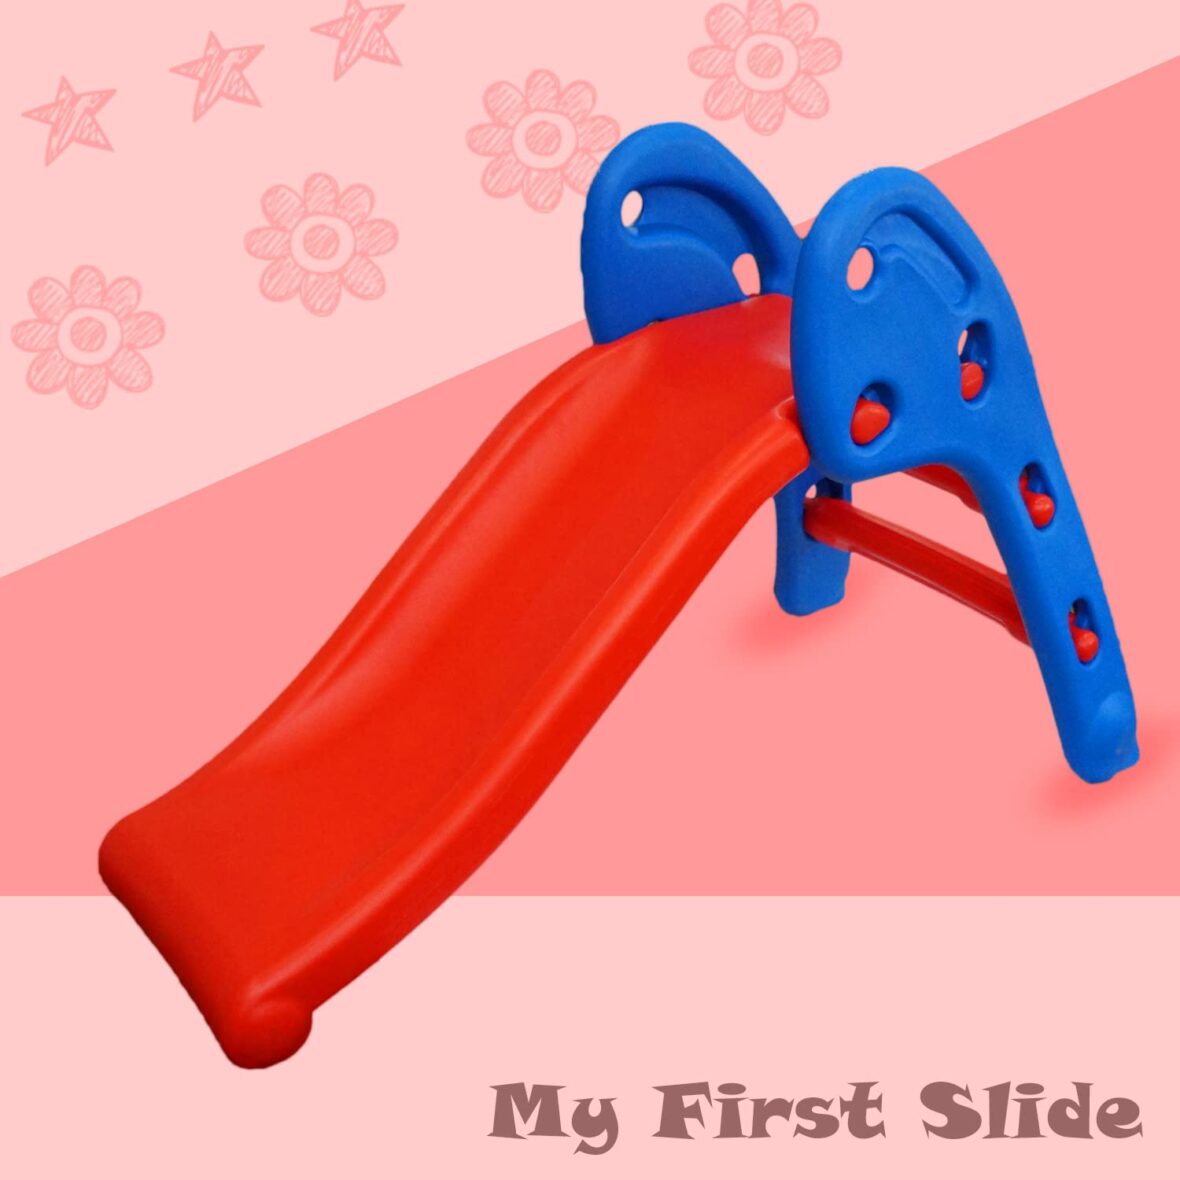 U Smile Slide for Kids – First Slide Foldable Beginners Slider – for Boys and Girls – Perfect Slides / Toys for Home, Indoor or Outdoor – 1 Year to 3 Years – L106 x B55 x H72.5 cm